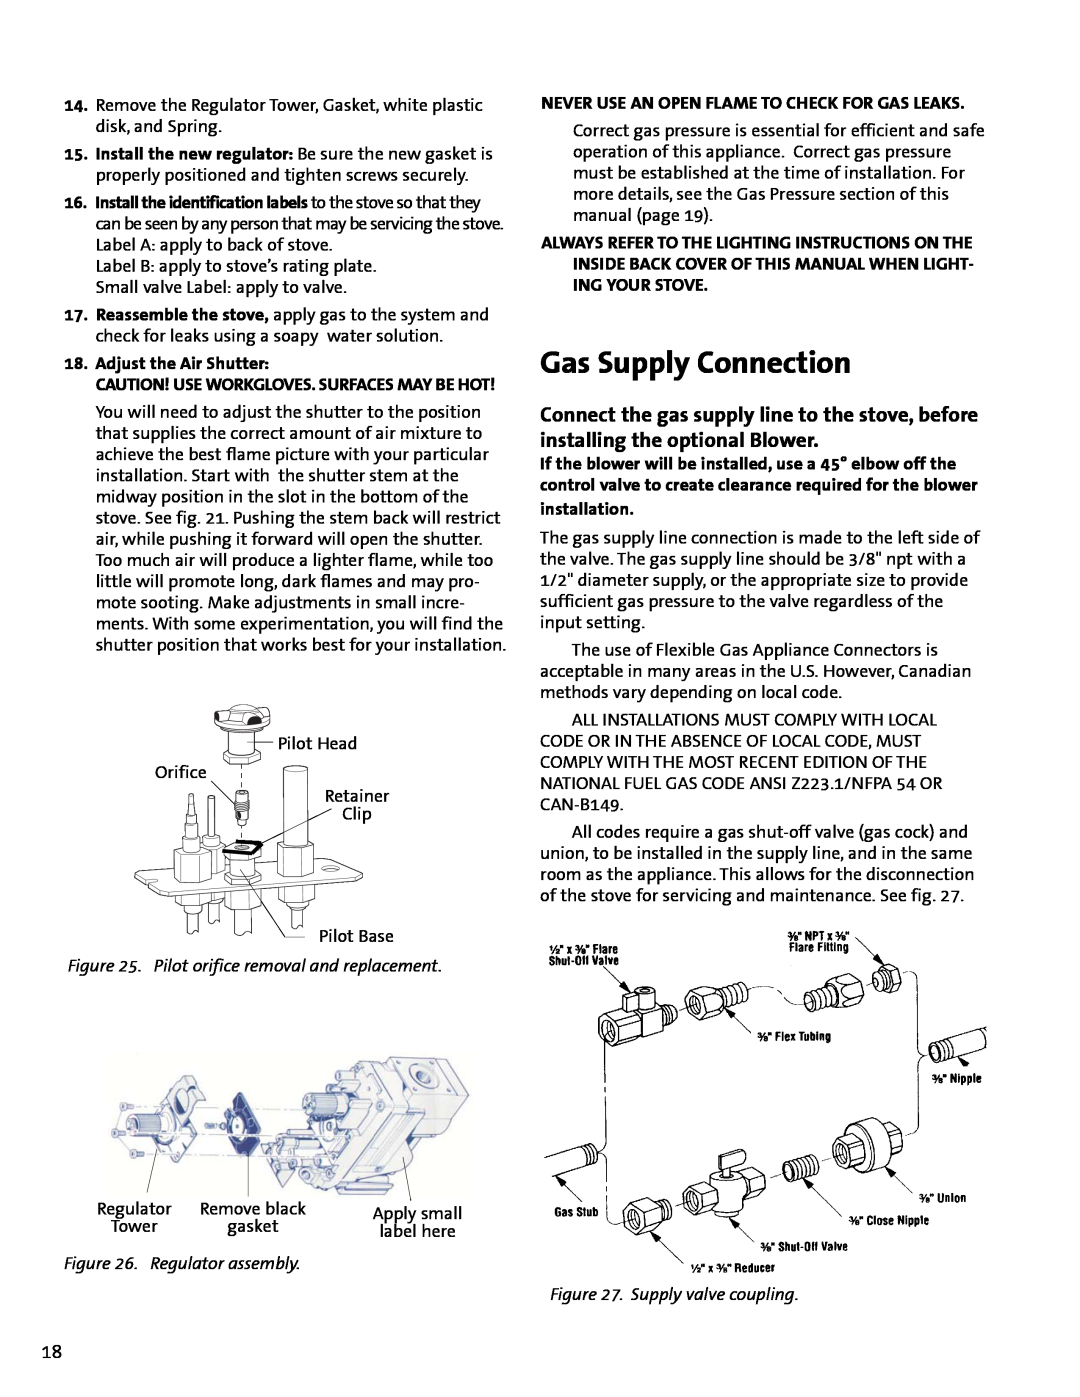 Jotul GF 400 DV Gas Supply Connection, Pilot orifice removal and replacement, Regulator assembly, Supply valve coupling 